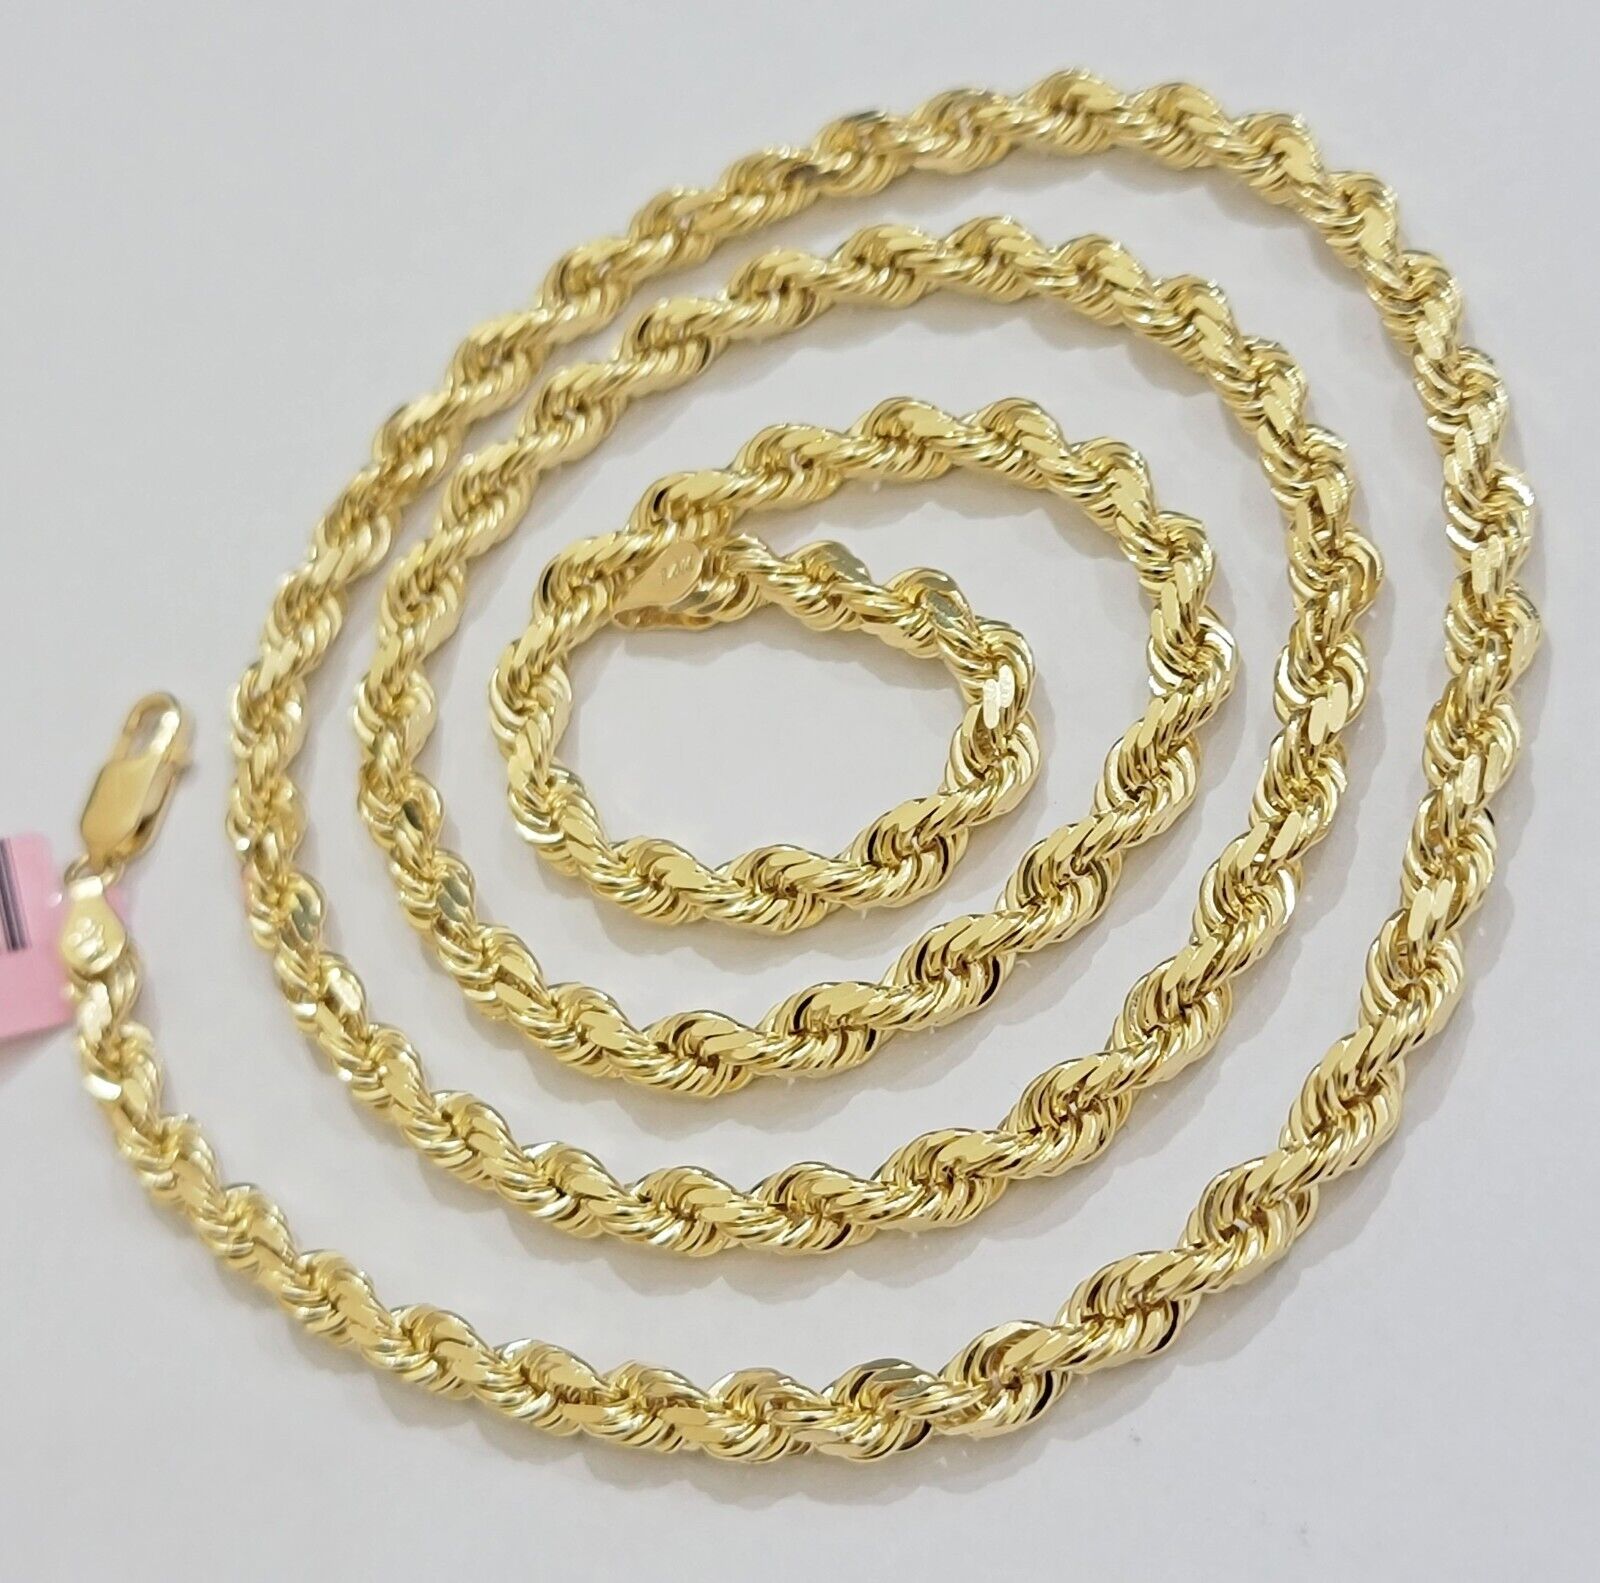 Real 14k Yellow Gold Rope Chain Necklace 24 Inch 4.5mm Diamond Cuts SOLID 14 KT